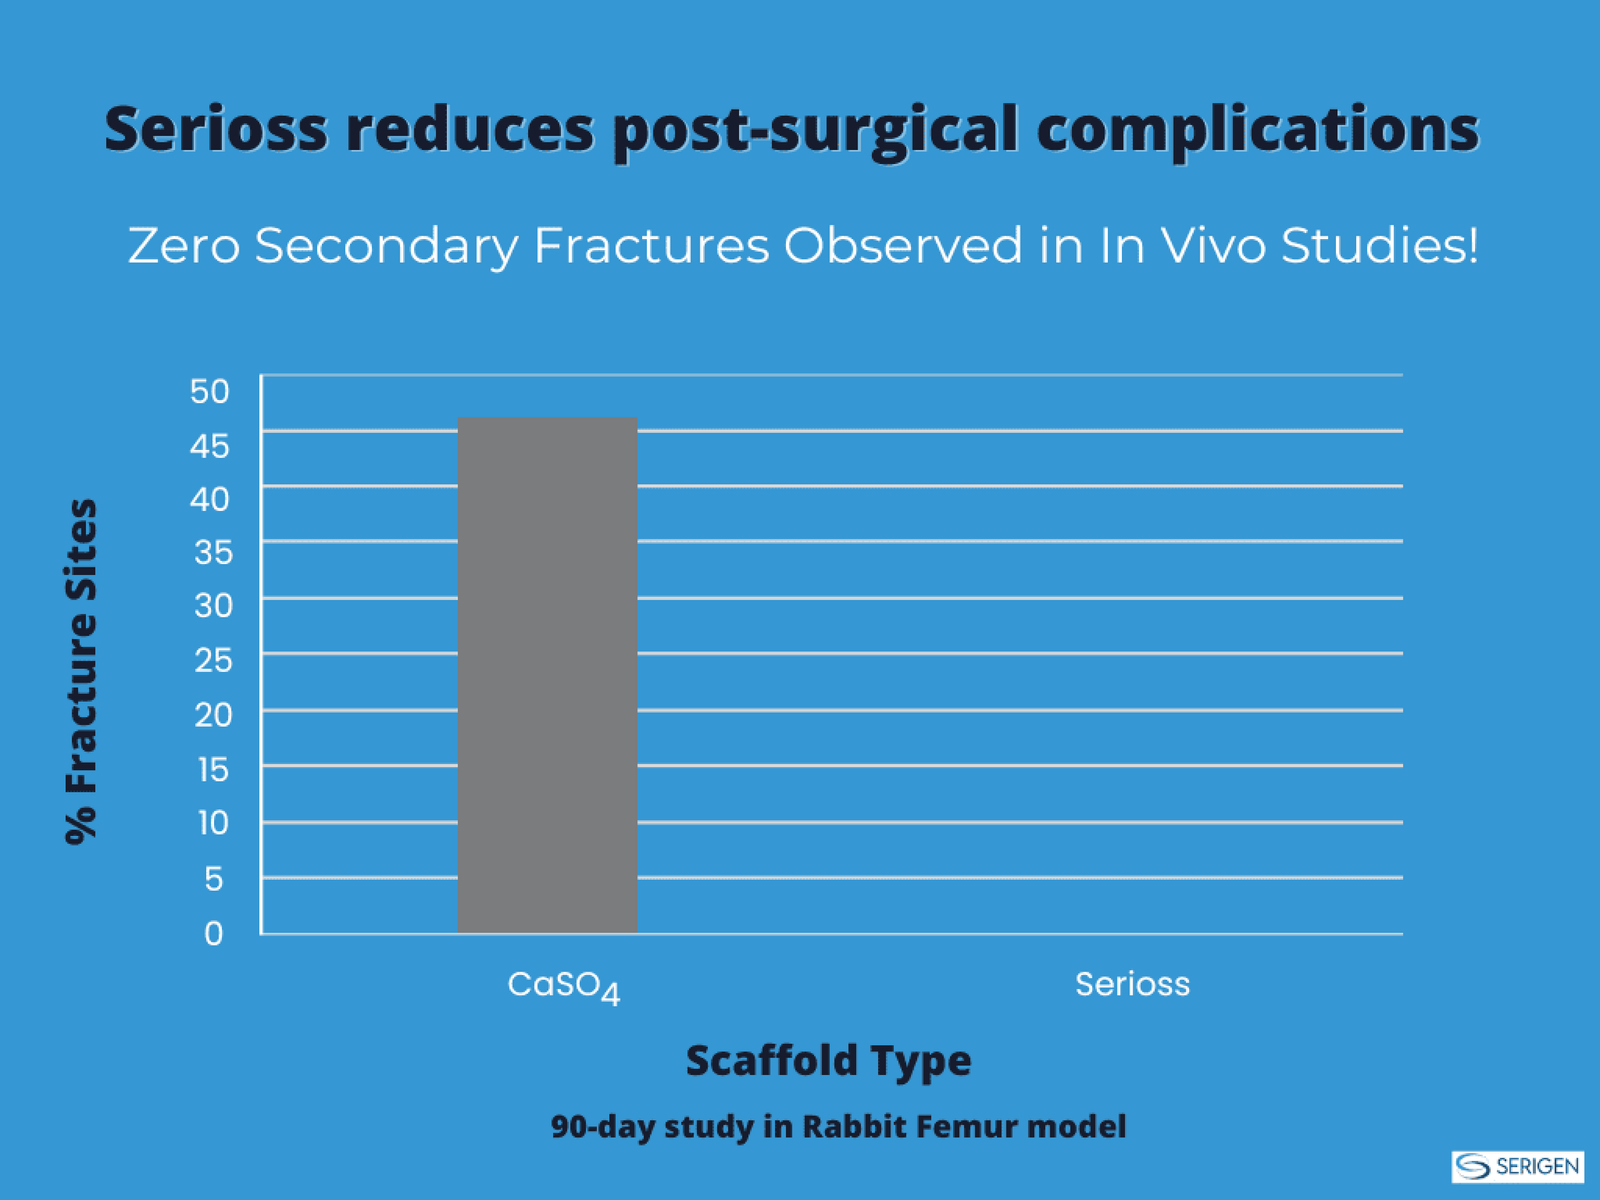 Serioss reduces post-surgical complications